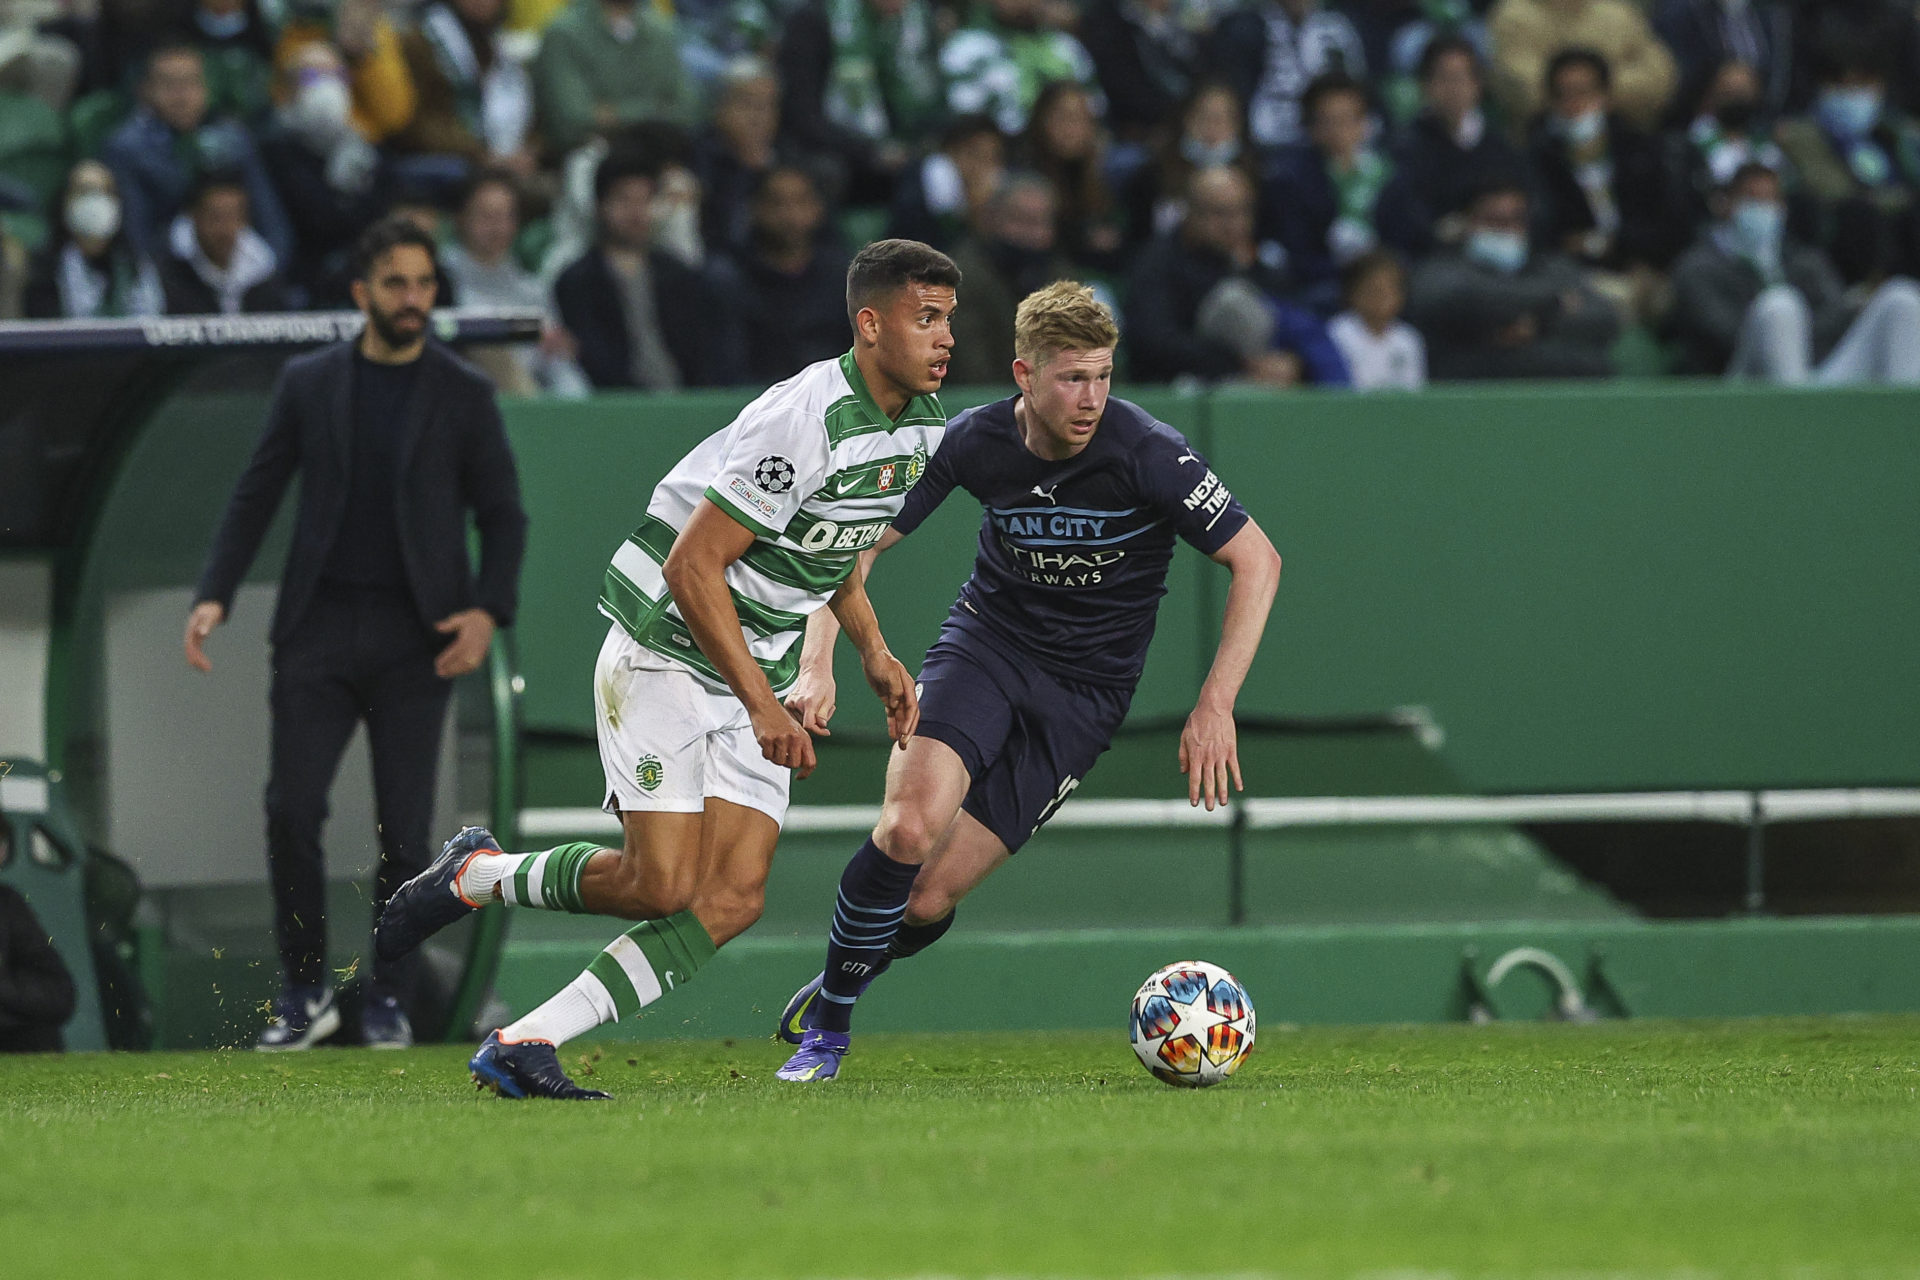 Nunes will leave Sporting